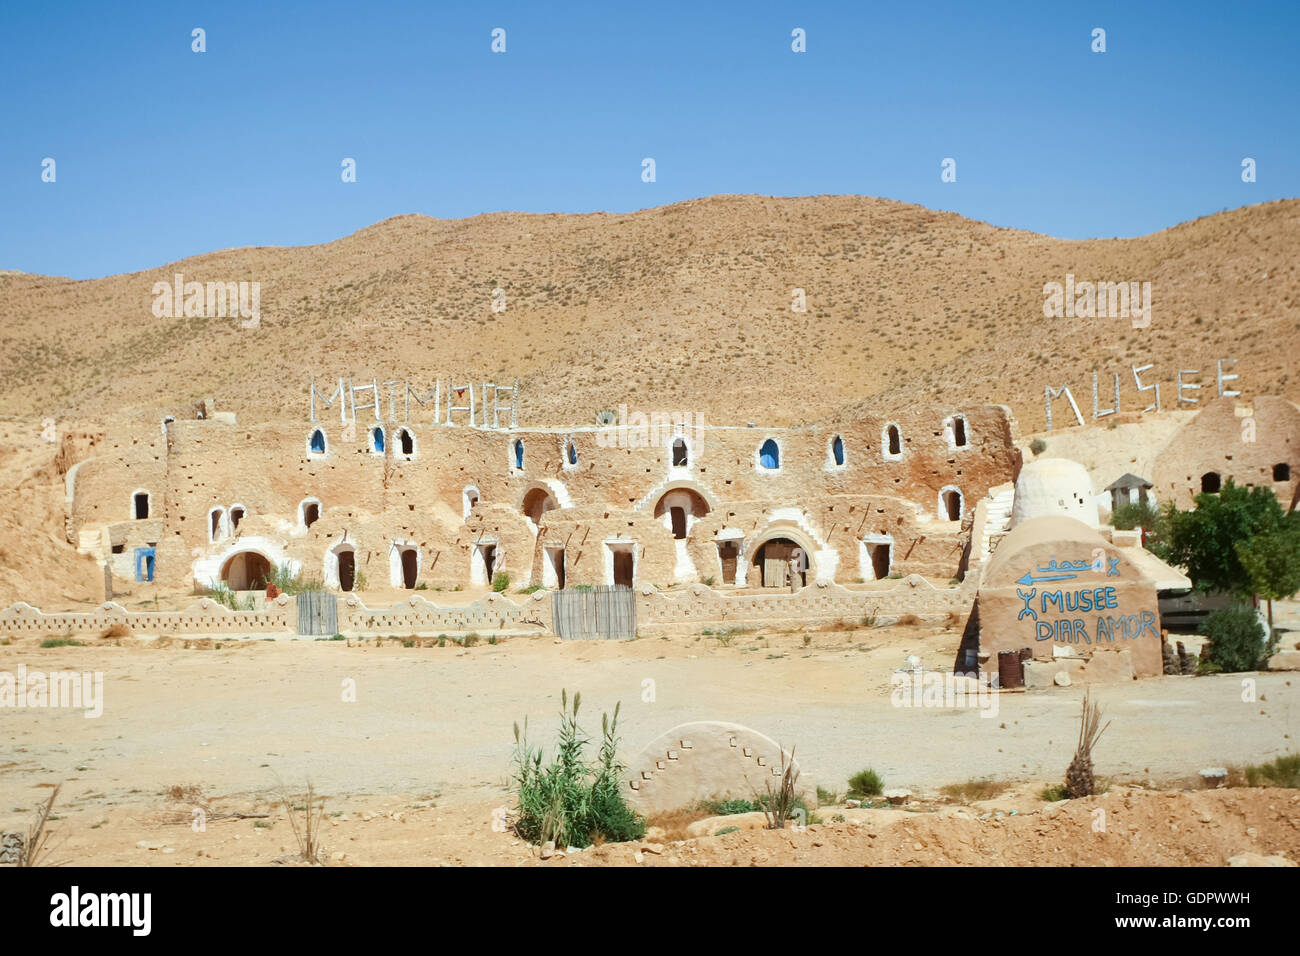 The Matmata museum in berber village in south Tunisia. Matmata is famous for its troglodyte cave dwellings. Stock Photo